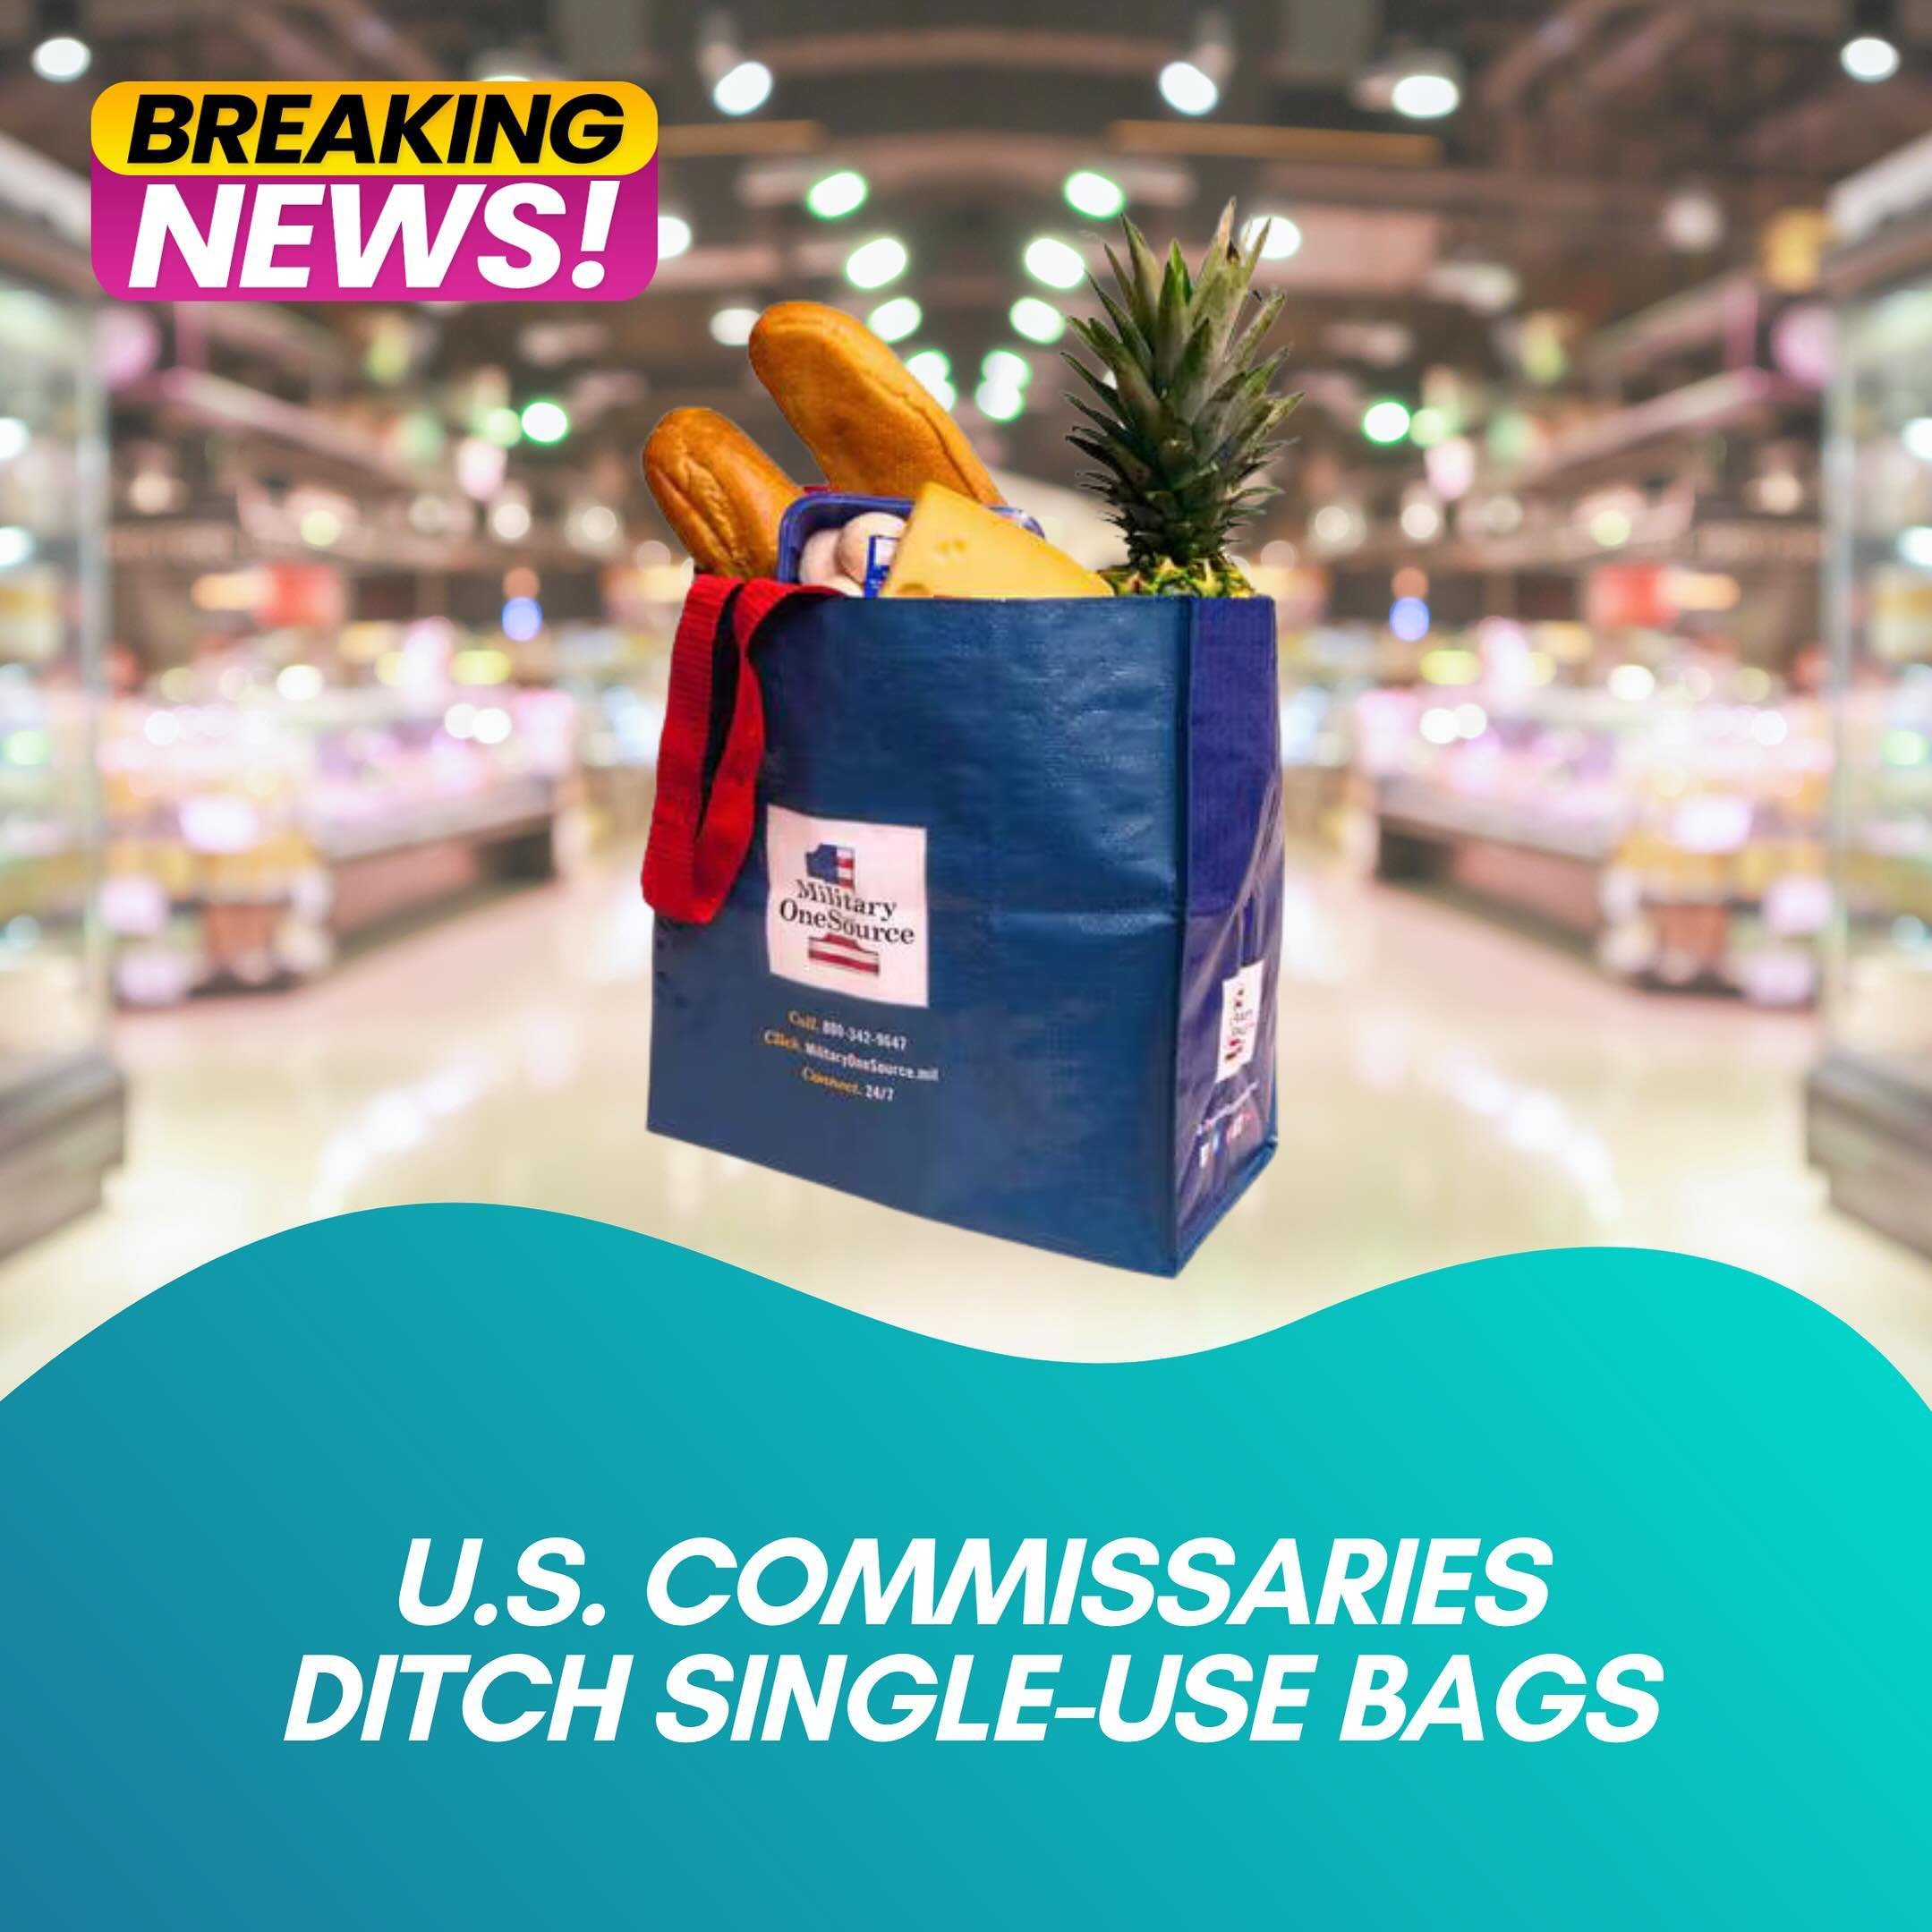 BREAKING! 🇺🇸🌱 Starting June 30th, all commissaries in California will eliminate single-use paper and plastic bags. 

What does this mean? Either invest in reusable bags OR purchase options at the counter, starting at 35 cents per bag. 🛄 

This is